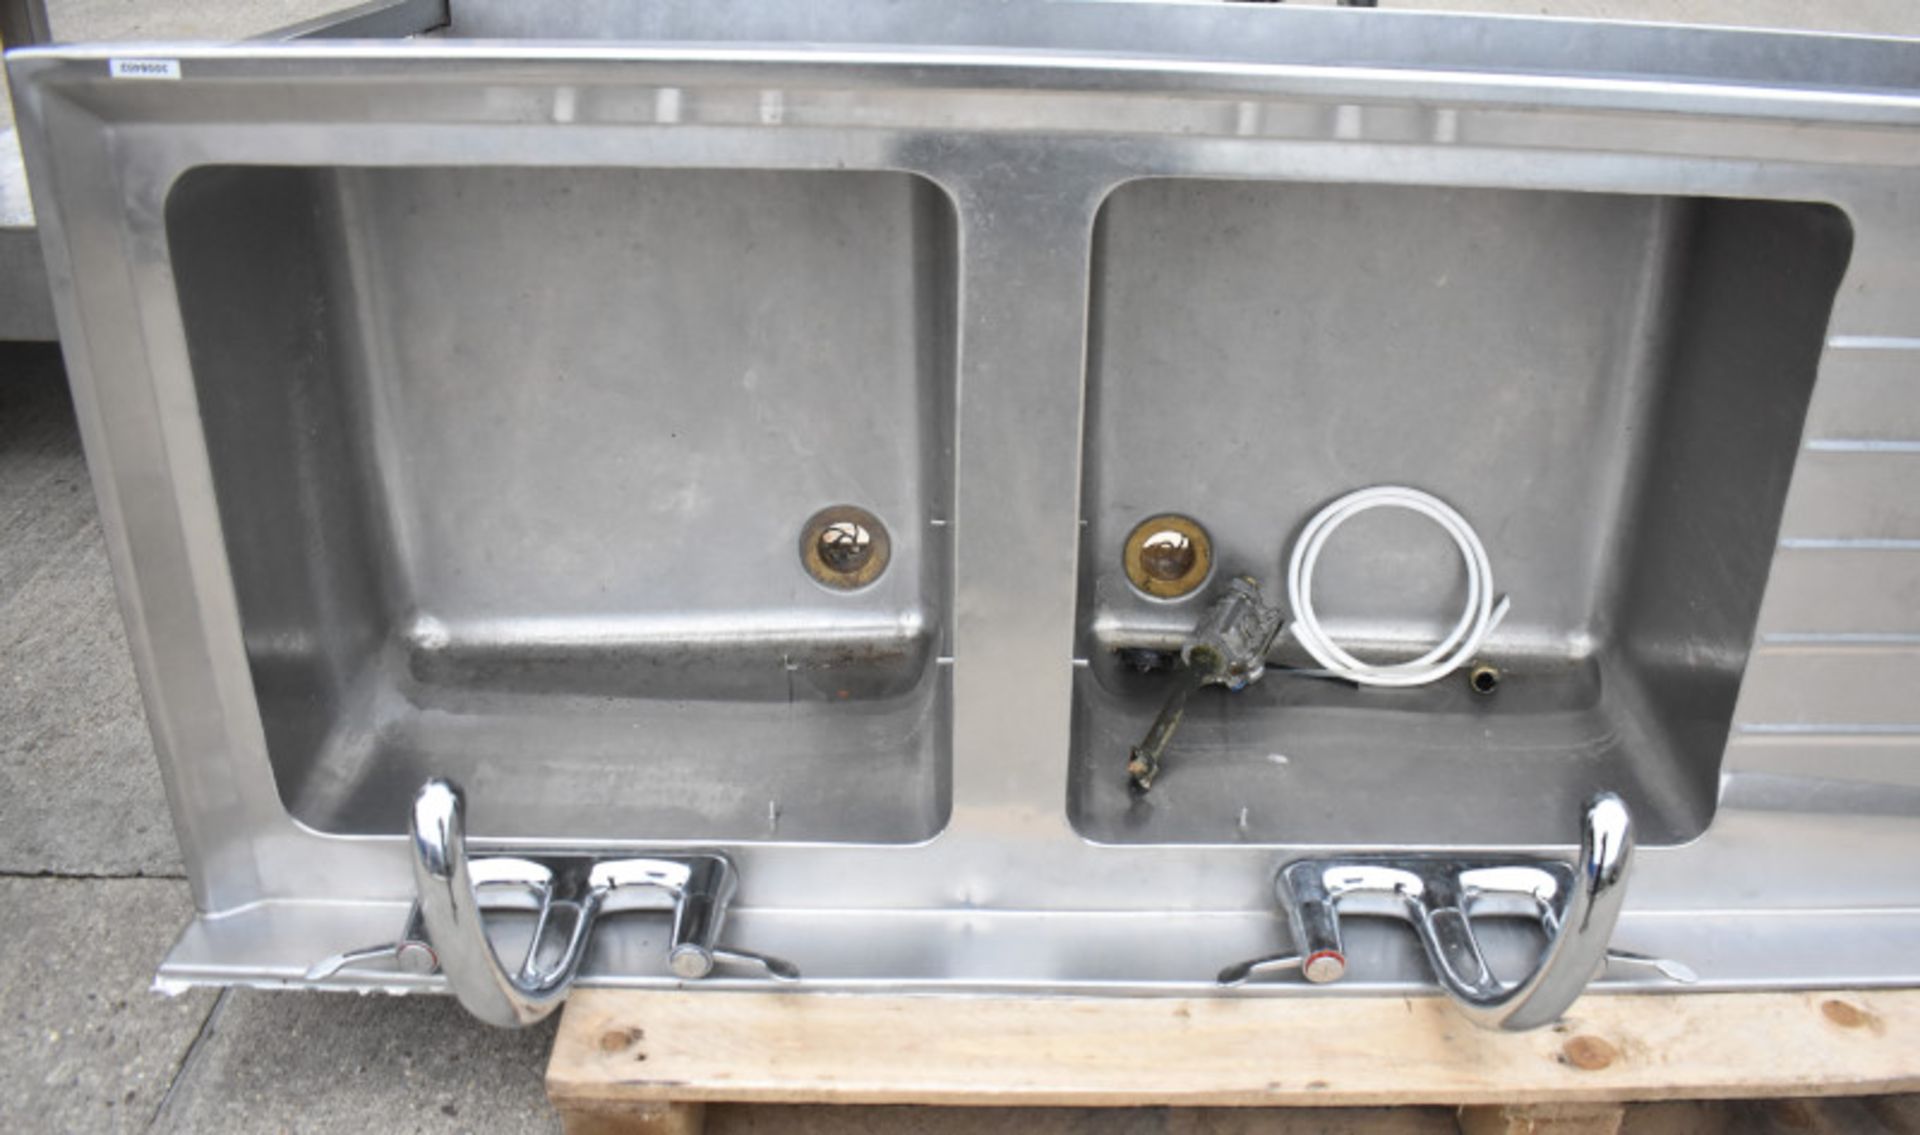 Stainless steel Double Sink Unit L 1800mm x D 600mm x H 920mm - Image 2 of 3